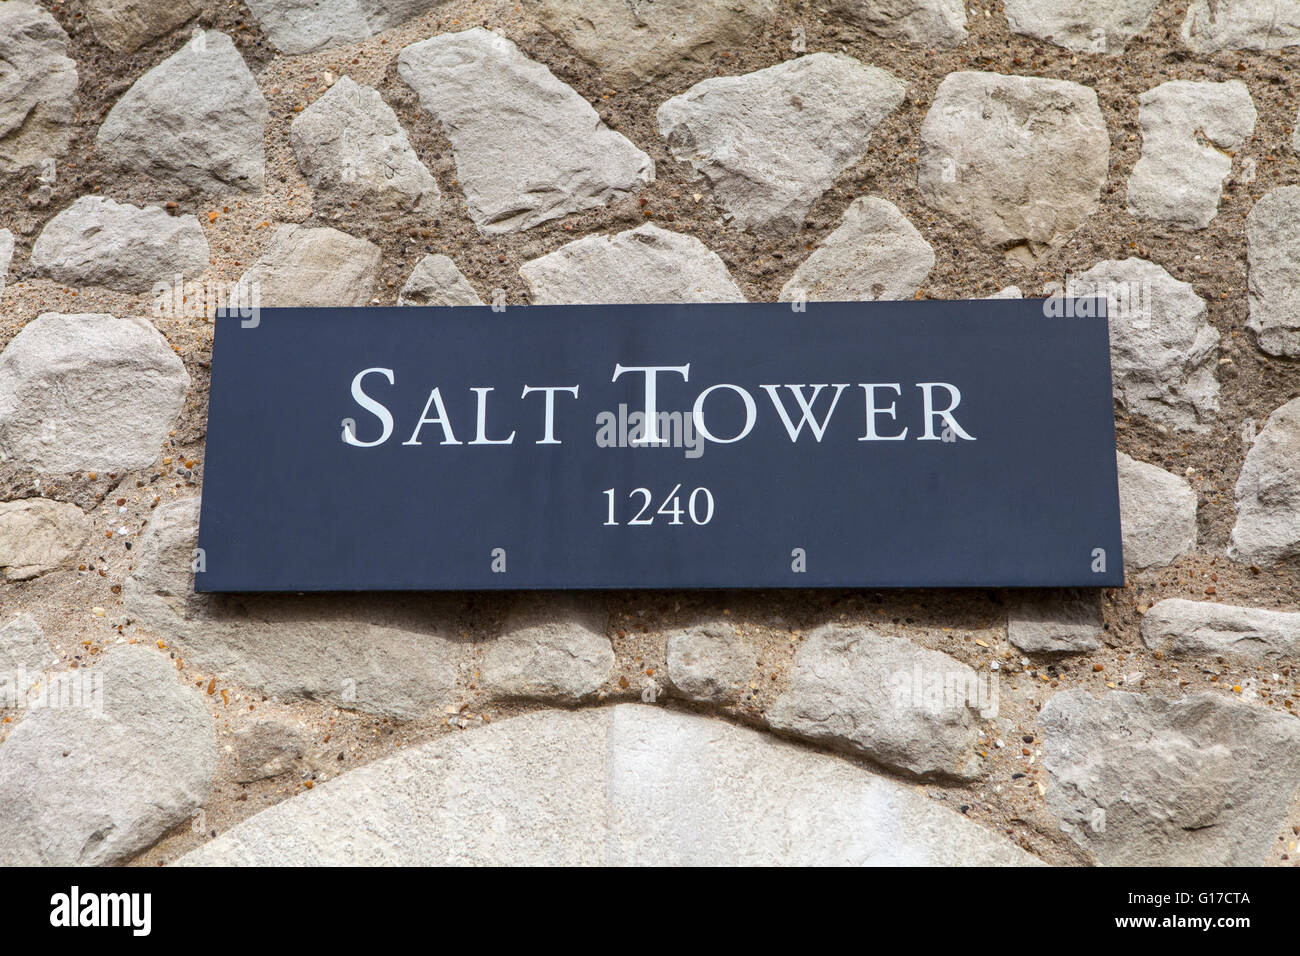 A view of the Salt Tower at the Tower of London.  A total of 21 towers make up the historic Tower of London fortification. Stock Photo